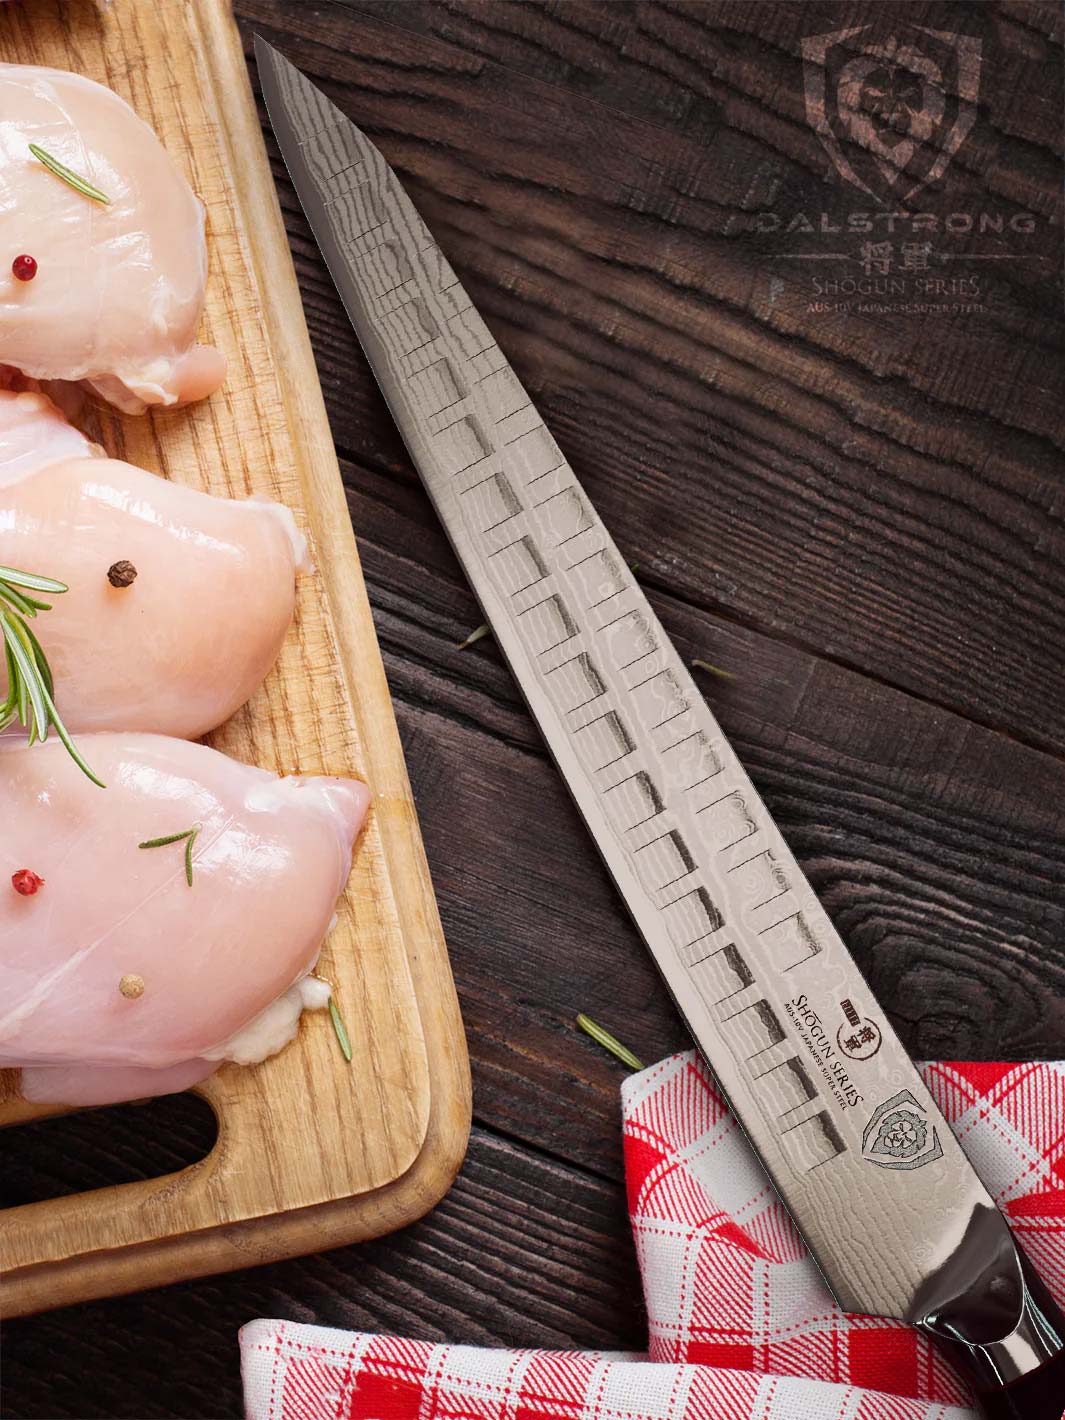 Dalstrong shogun series 10.5 inch sujihiki slicing knife and three cuts of chicken meat on a wooden board.